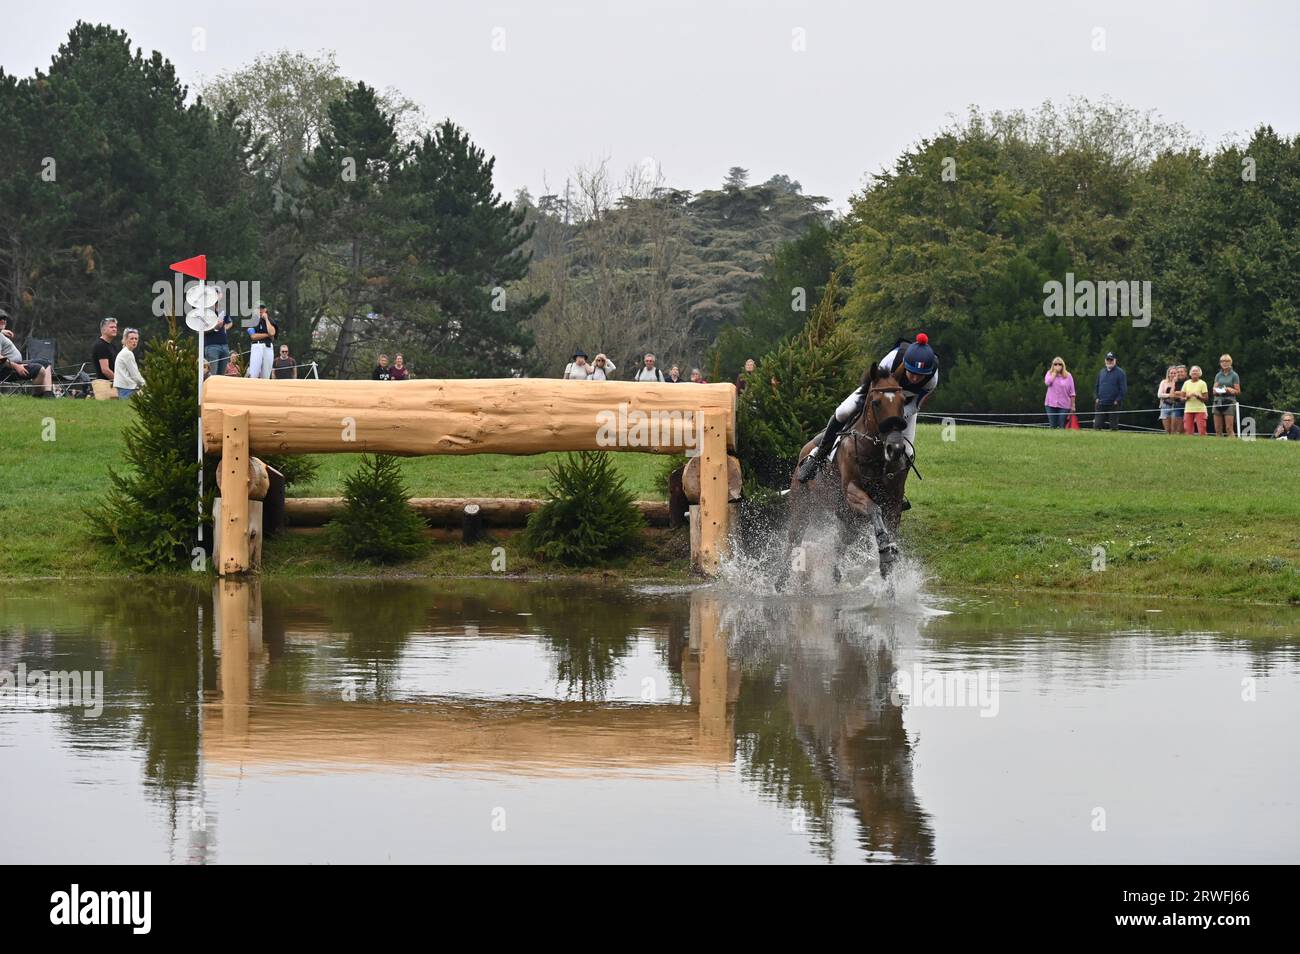 Gaspard Maksud on Kan-Do 2, cross country phase of the CCI-L 4* competition Blenheim Palace International Horse Trials 2023, Woodstock , Oxfordshire Stock Photo